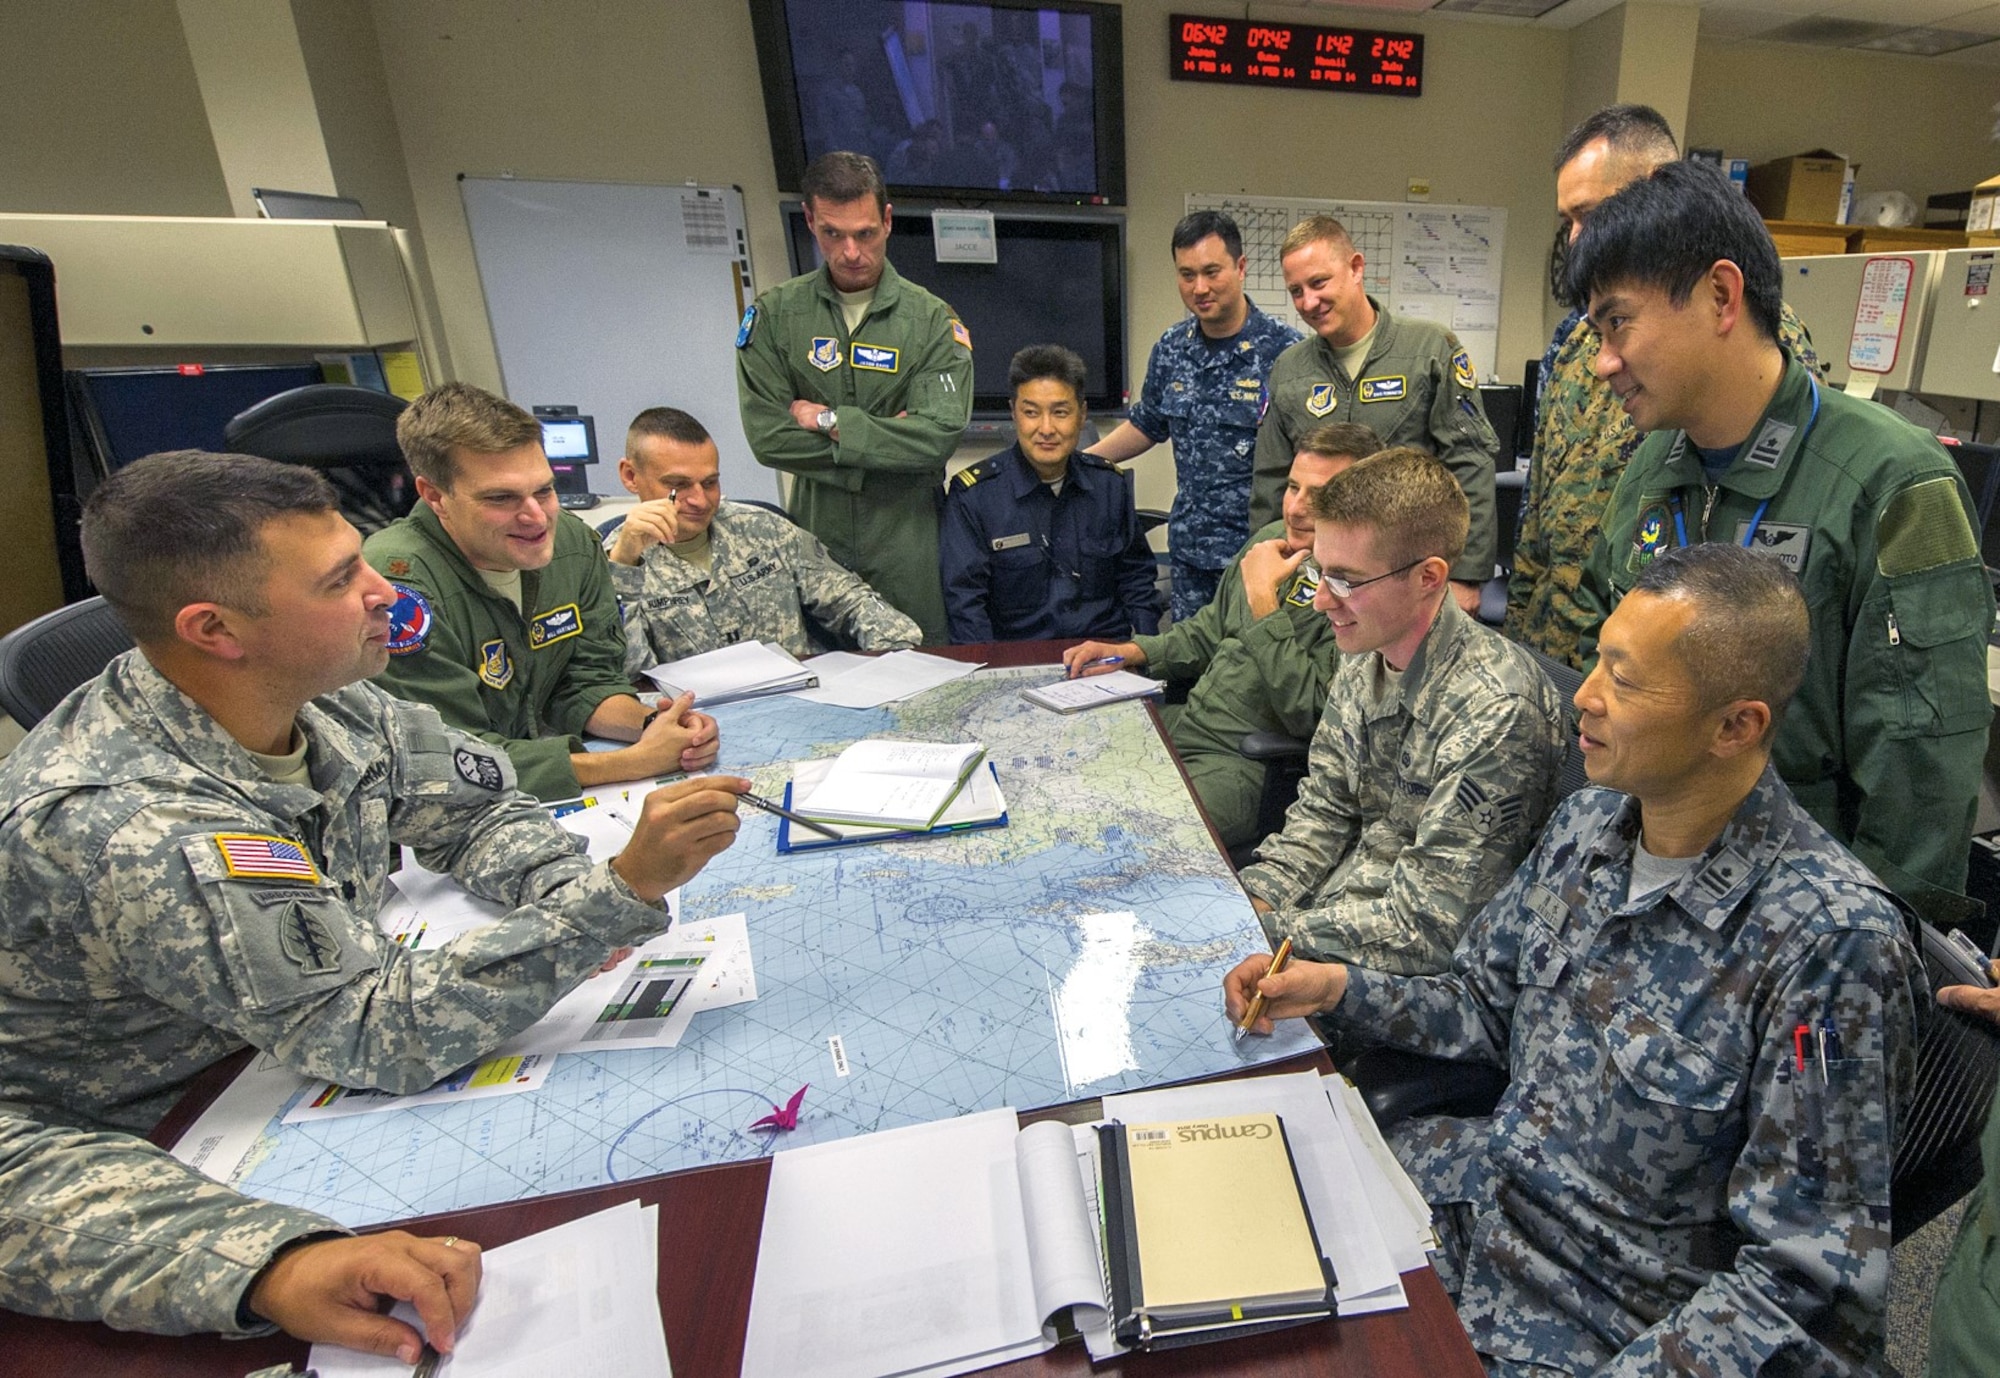 U.S. and international military personnel engage in wargaming and operations planning. (U.S. Air Force/Nathan Allen)